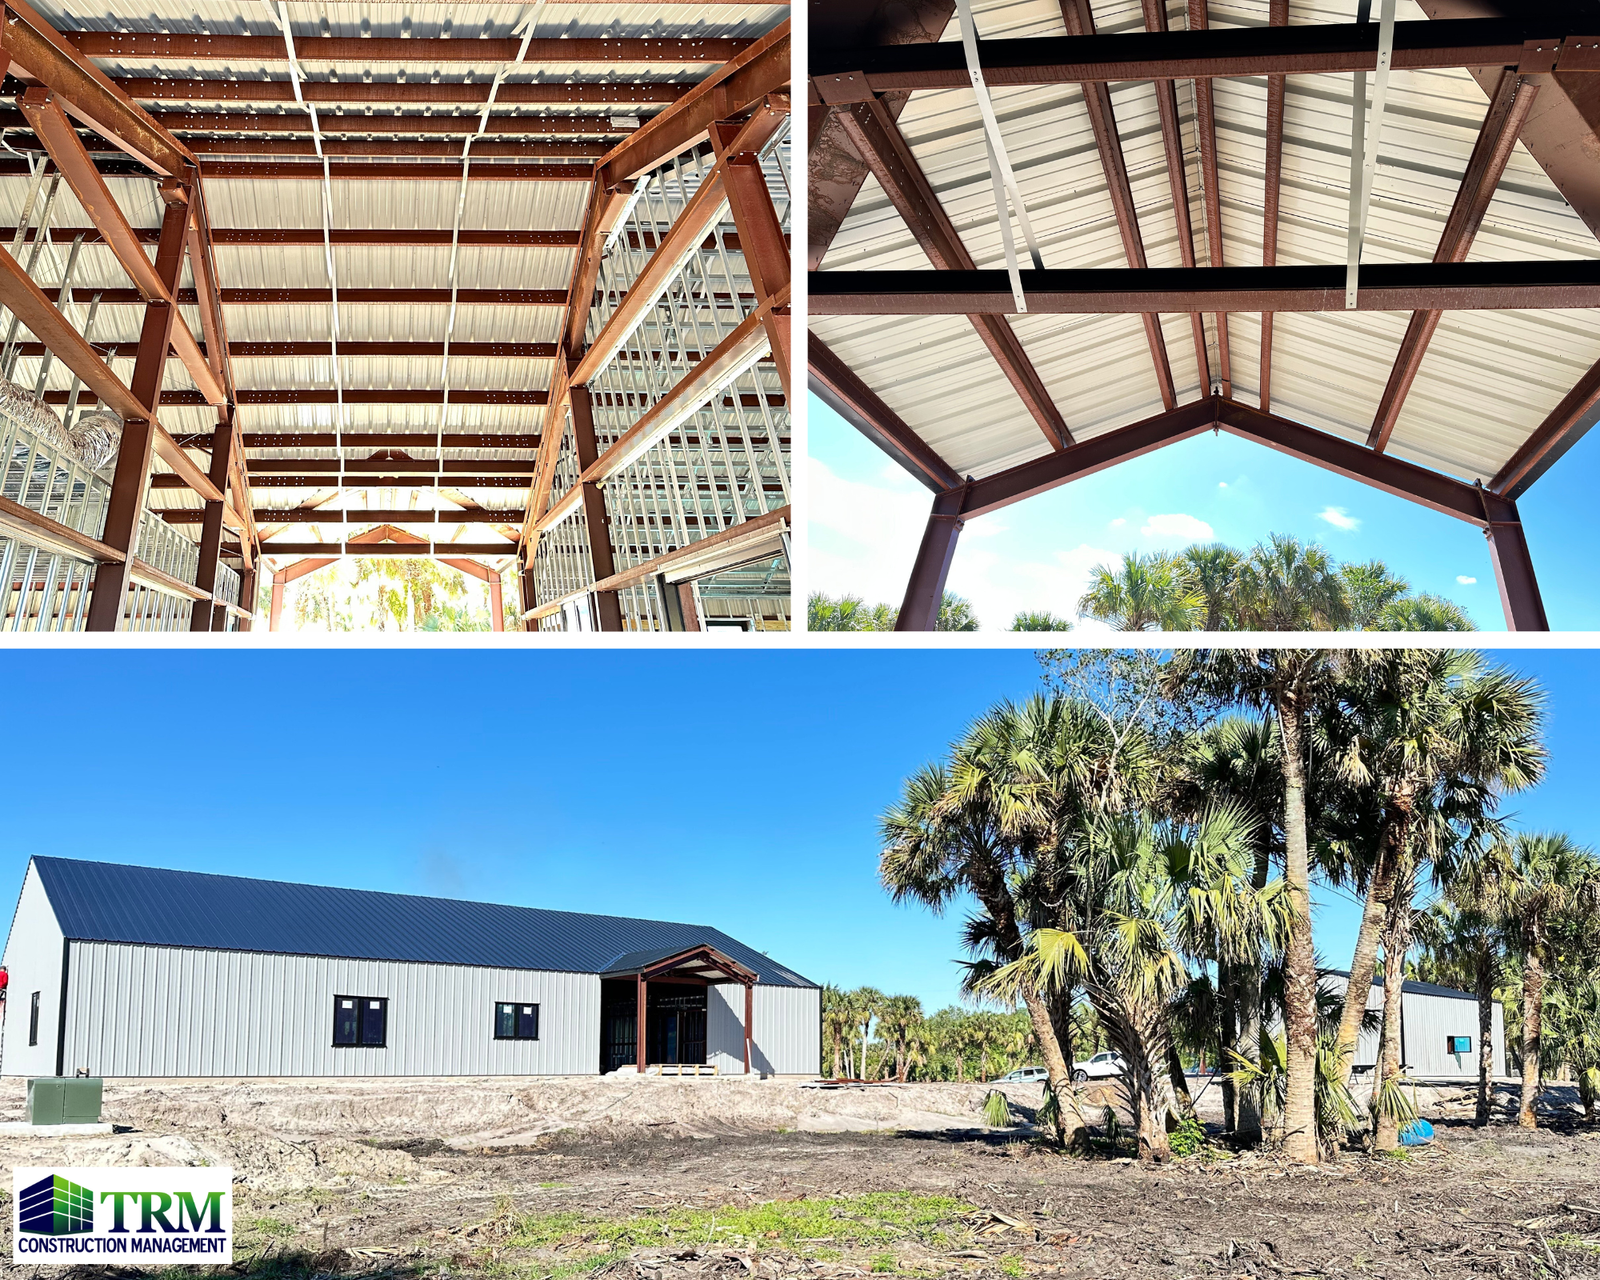 Project Update: Greenridge Ranch In Martin County – Framing And Siding